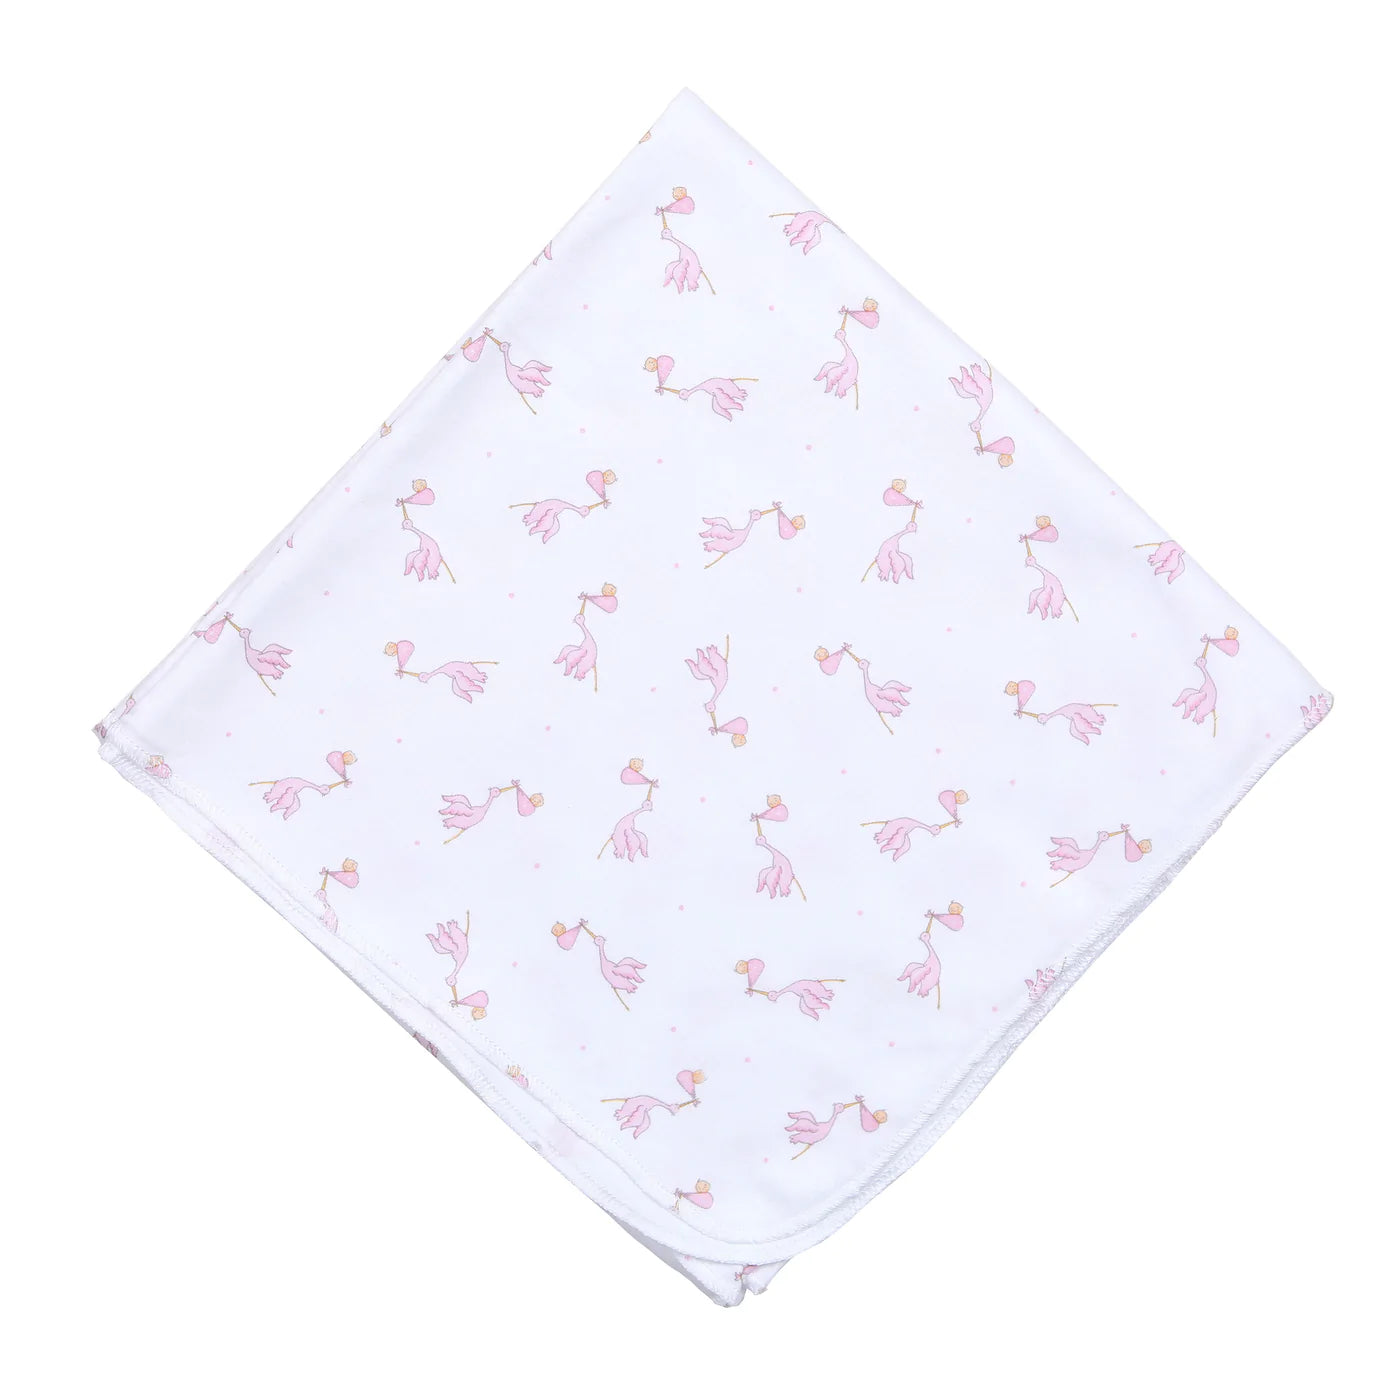 Worth the Wait Swaddle Blanket, Pink